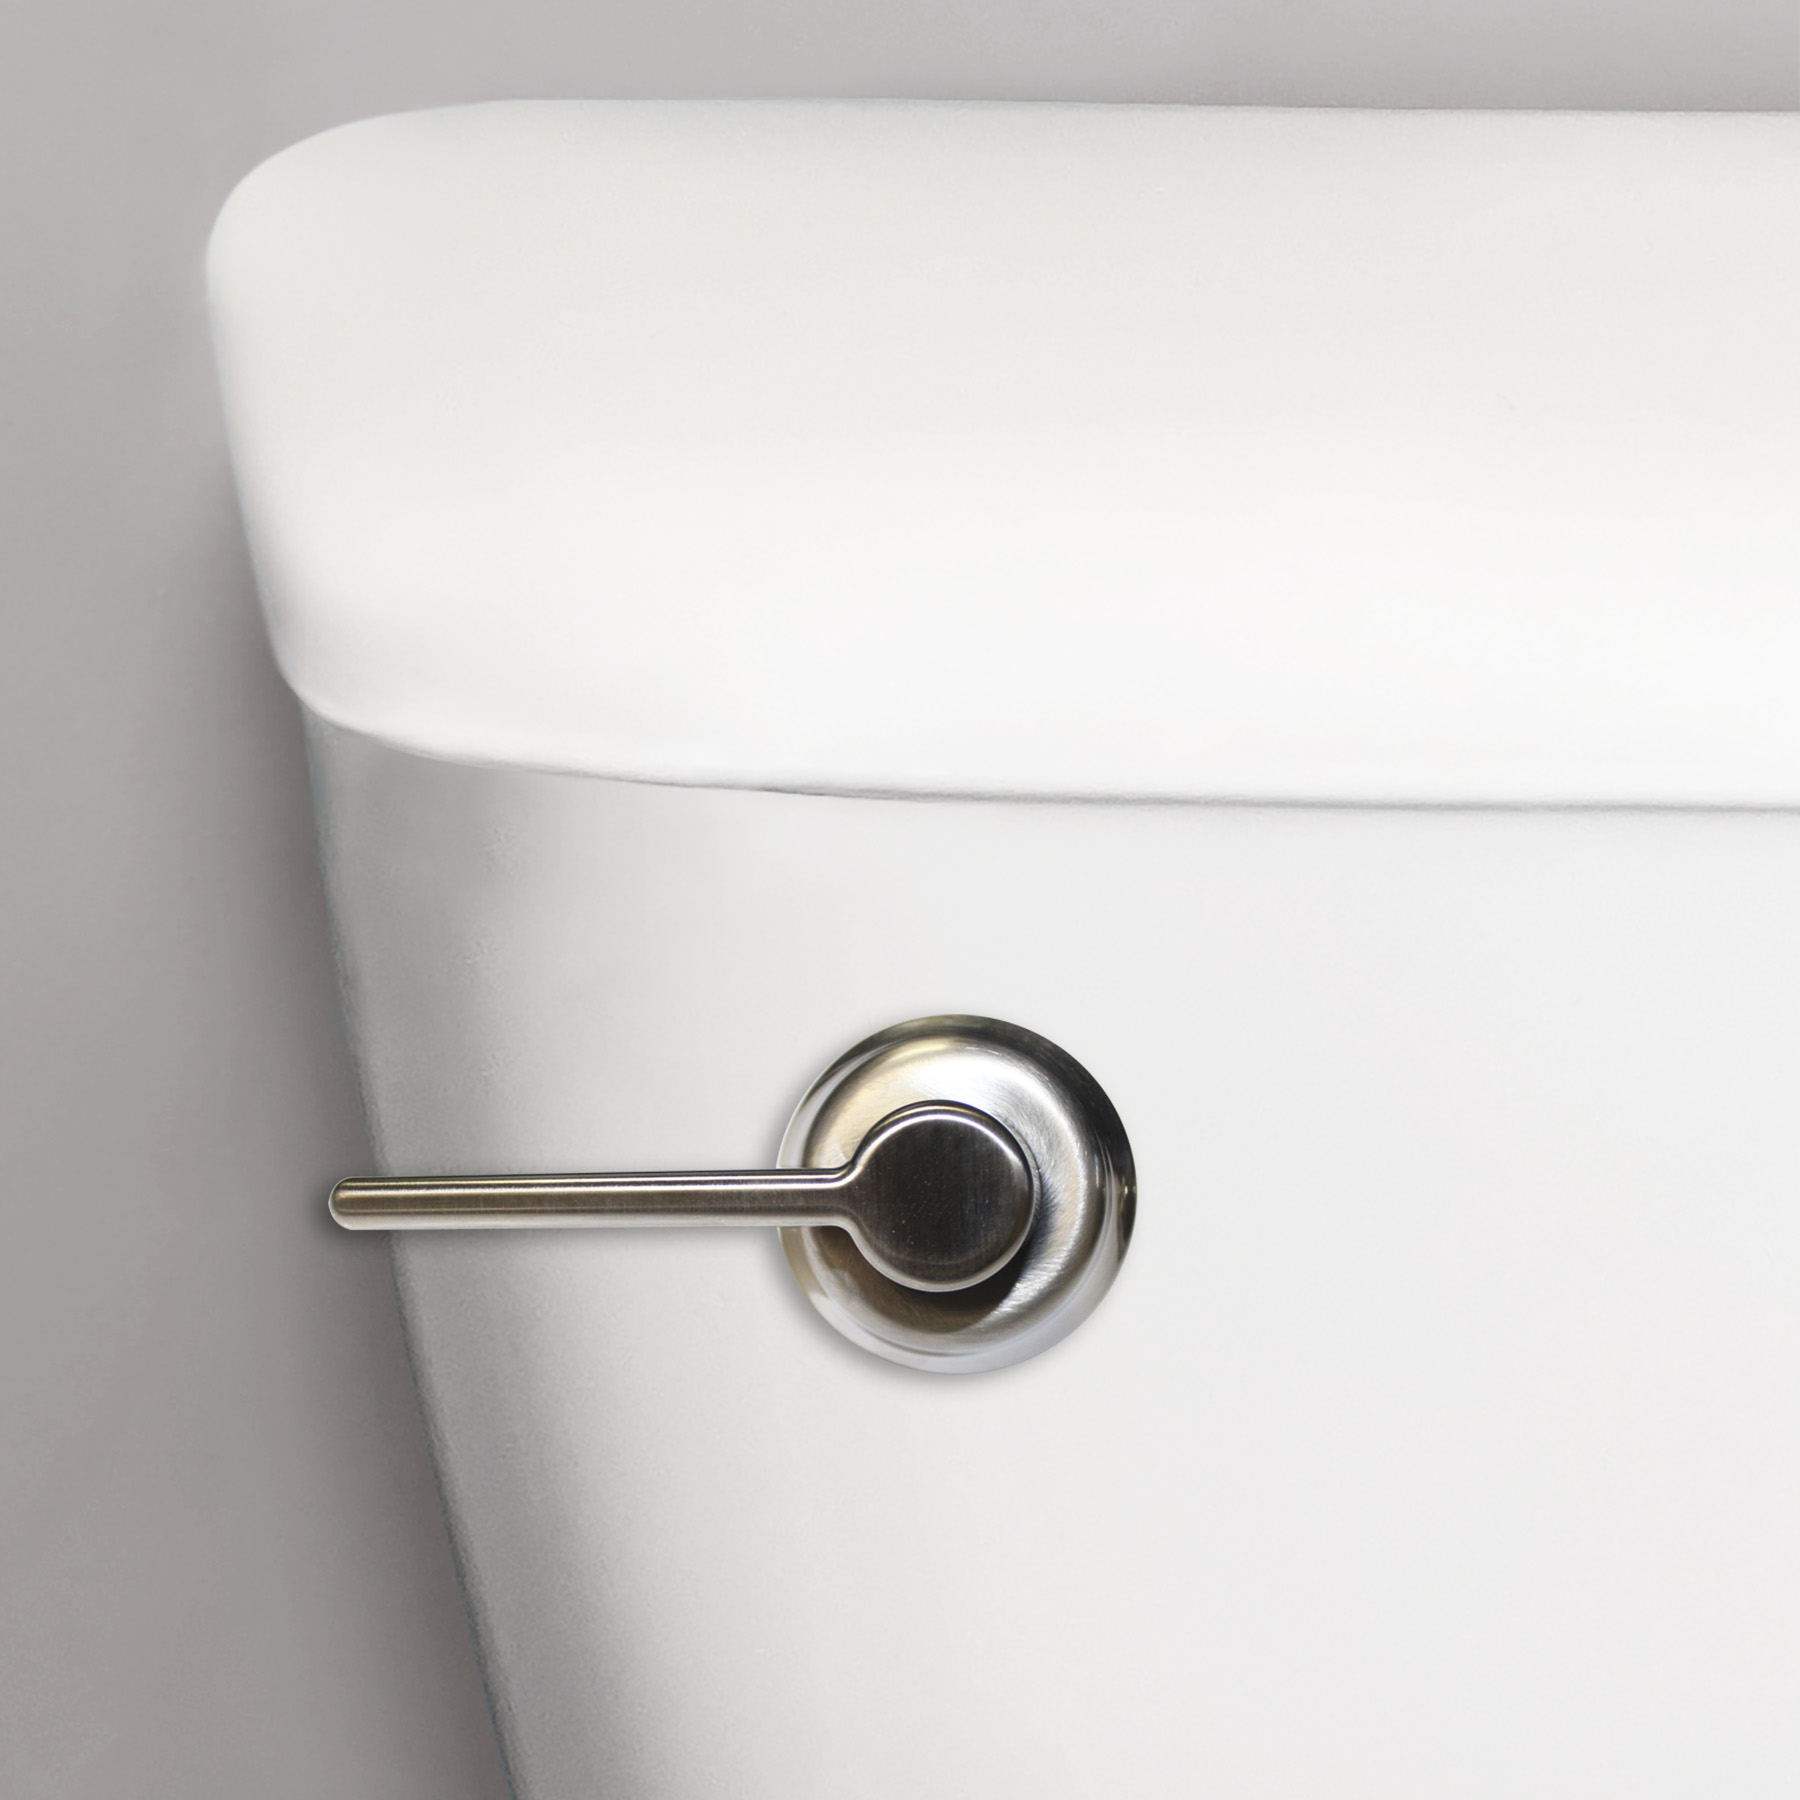 Classic chrome toilet handle shown close up on a toilet tank